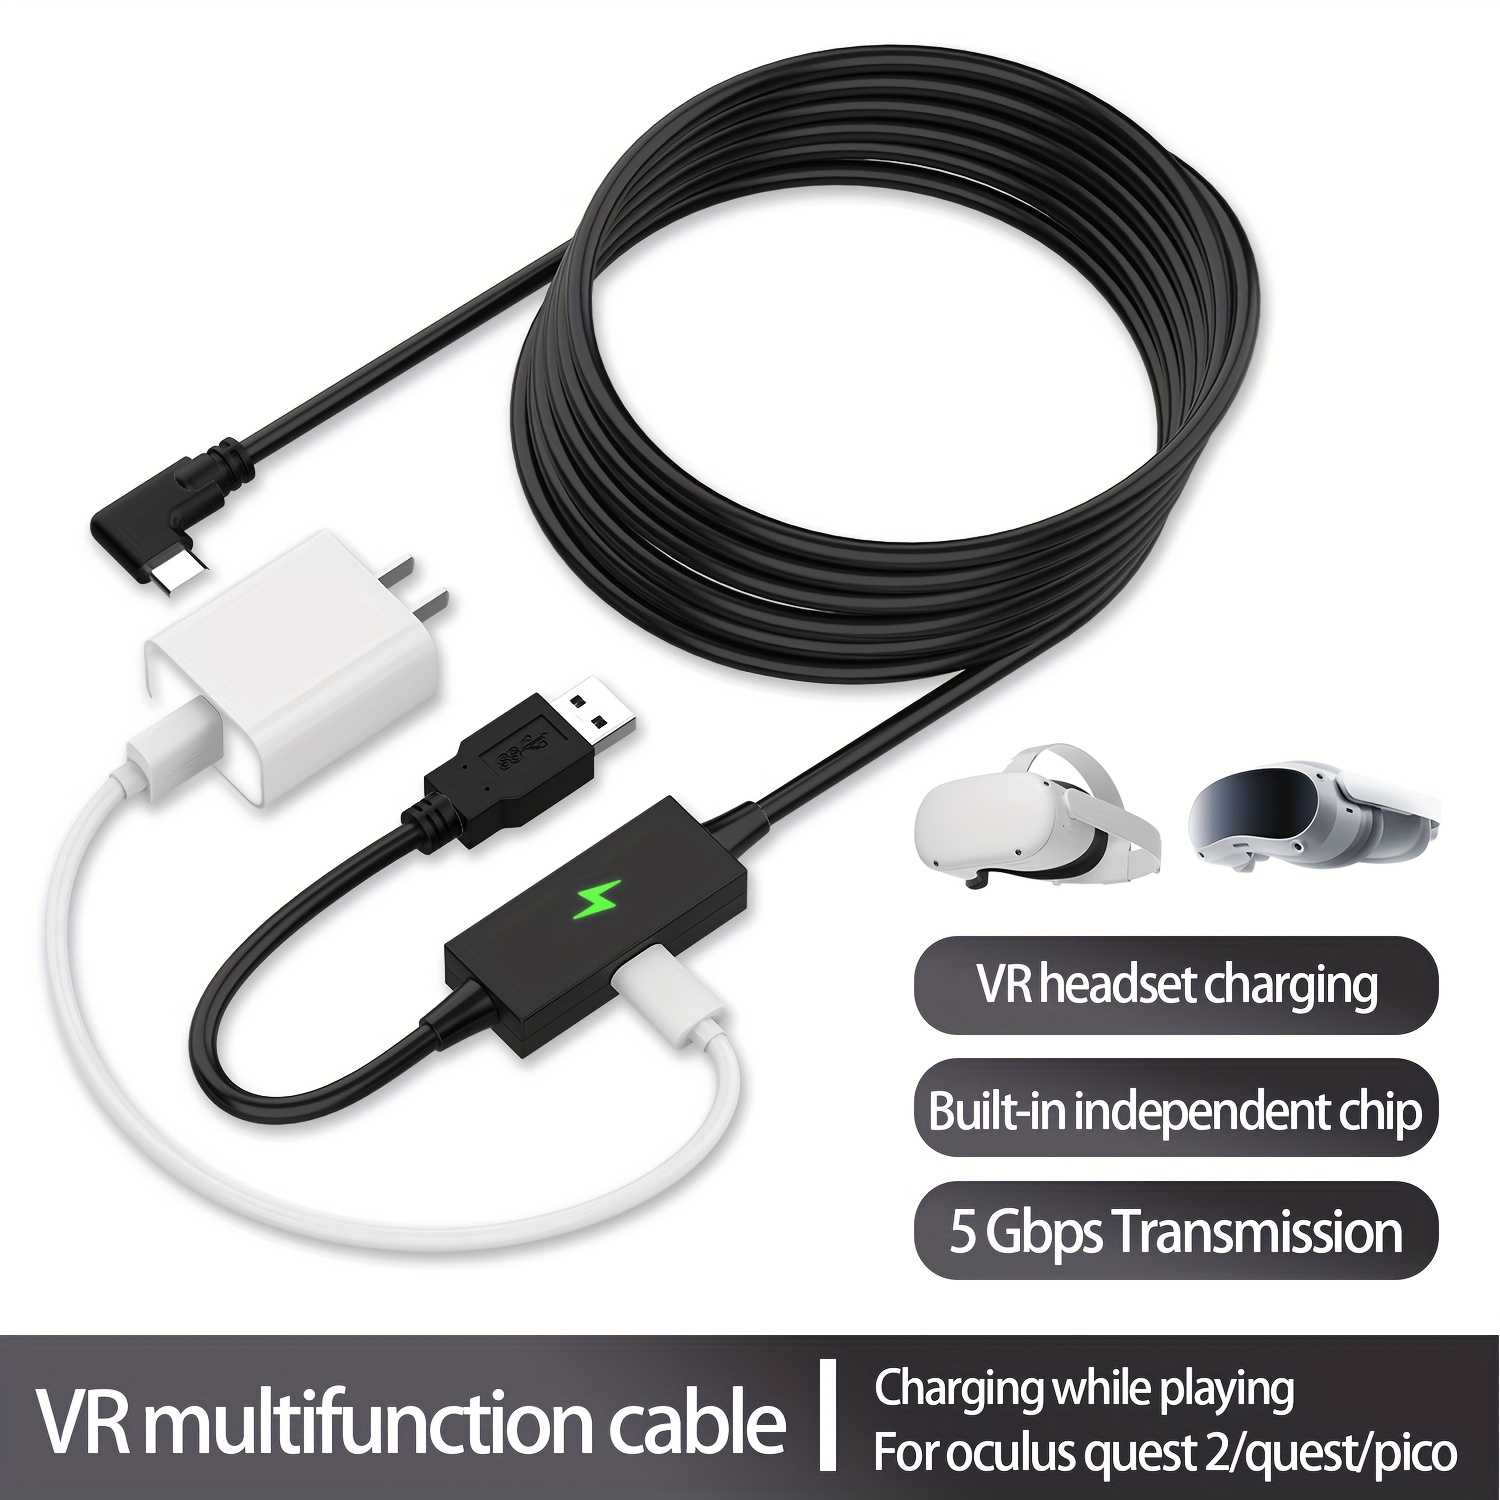 Link Cable Oculus Quest 2, Oculus Quest 2 Charging Cable